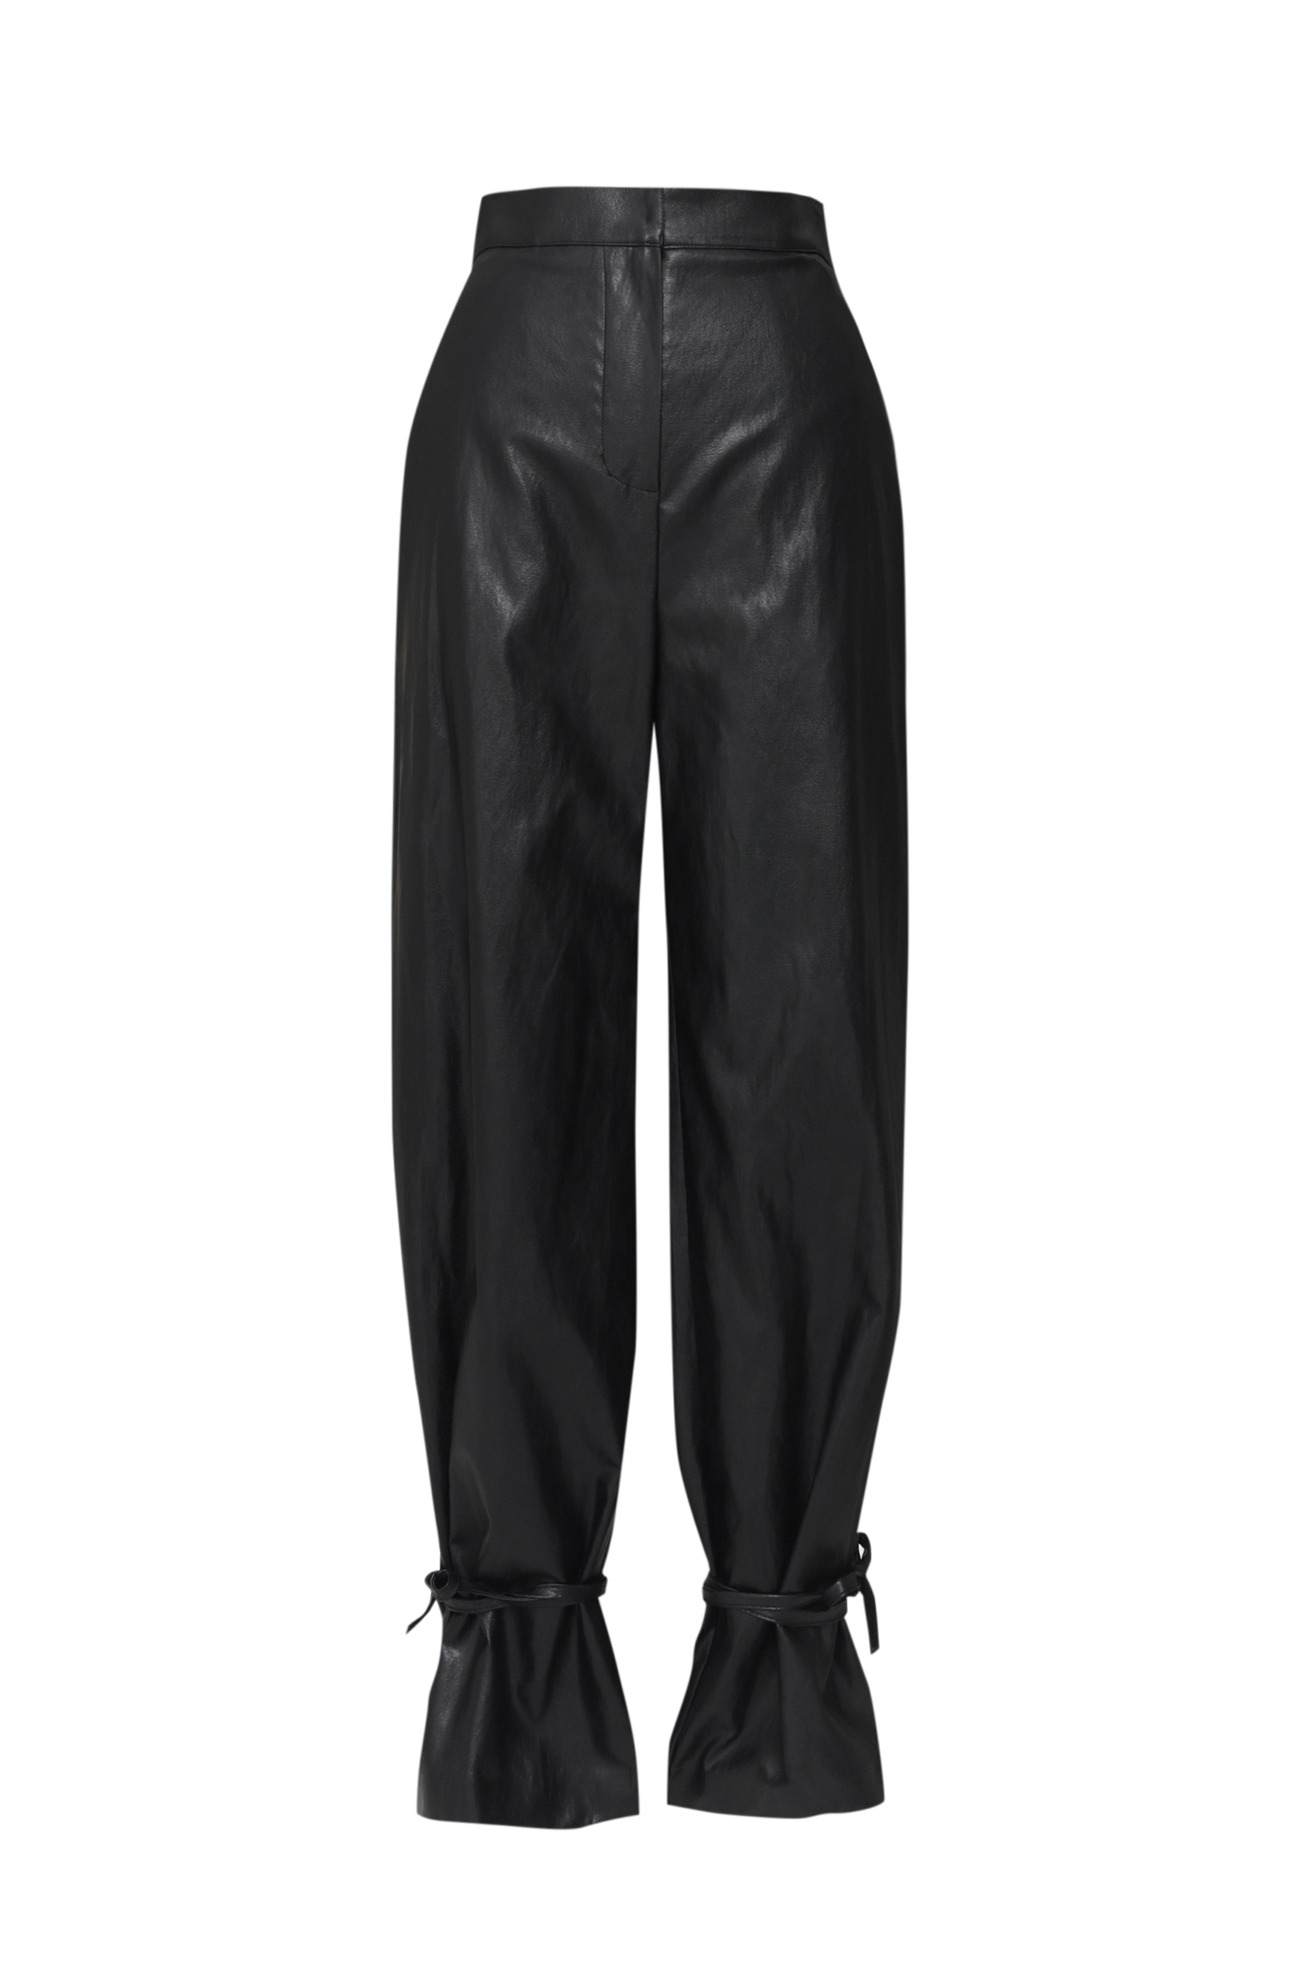 Eco Leather String Pants